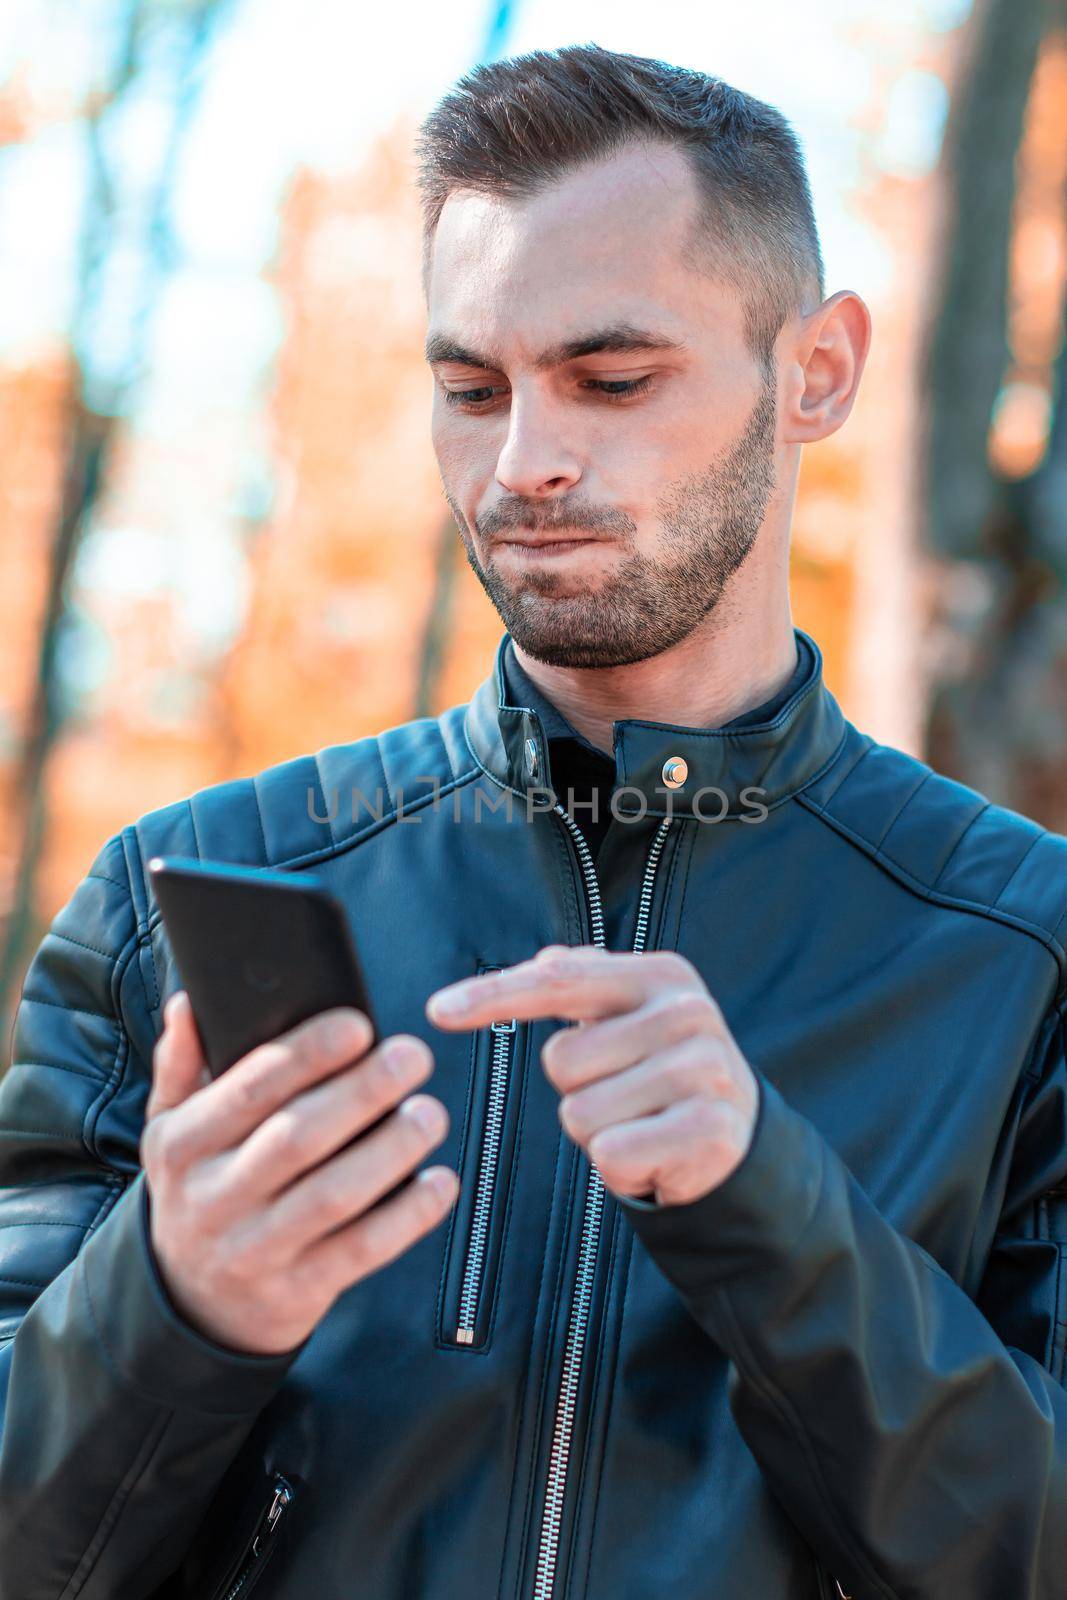 Youthful Guy Using Black Smartphone at the Beautiful Autumn Park. Handsome Young Man with Mobile Phone at Sunny Day - Medium CloseUp Shot